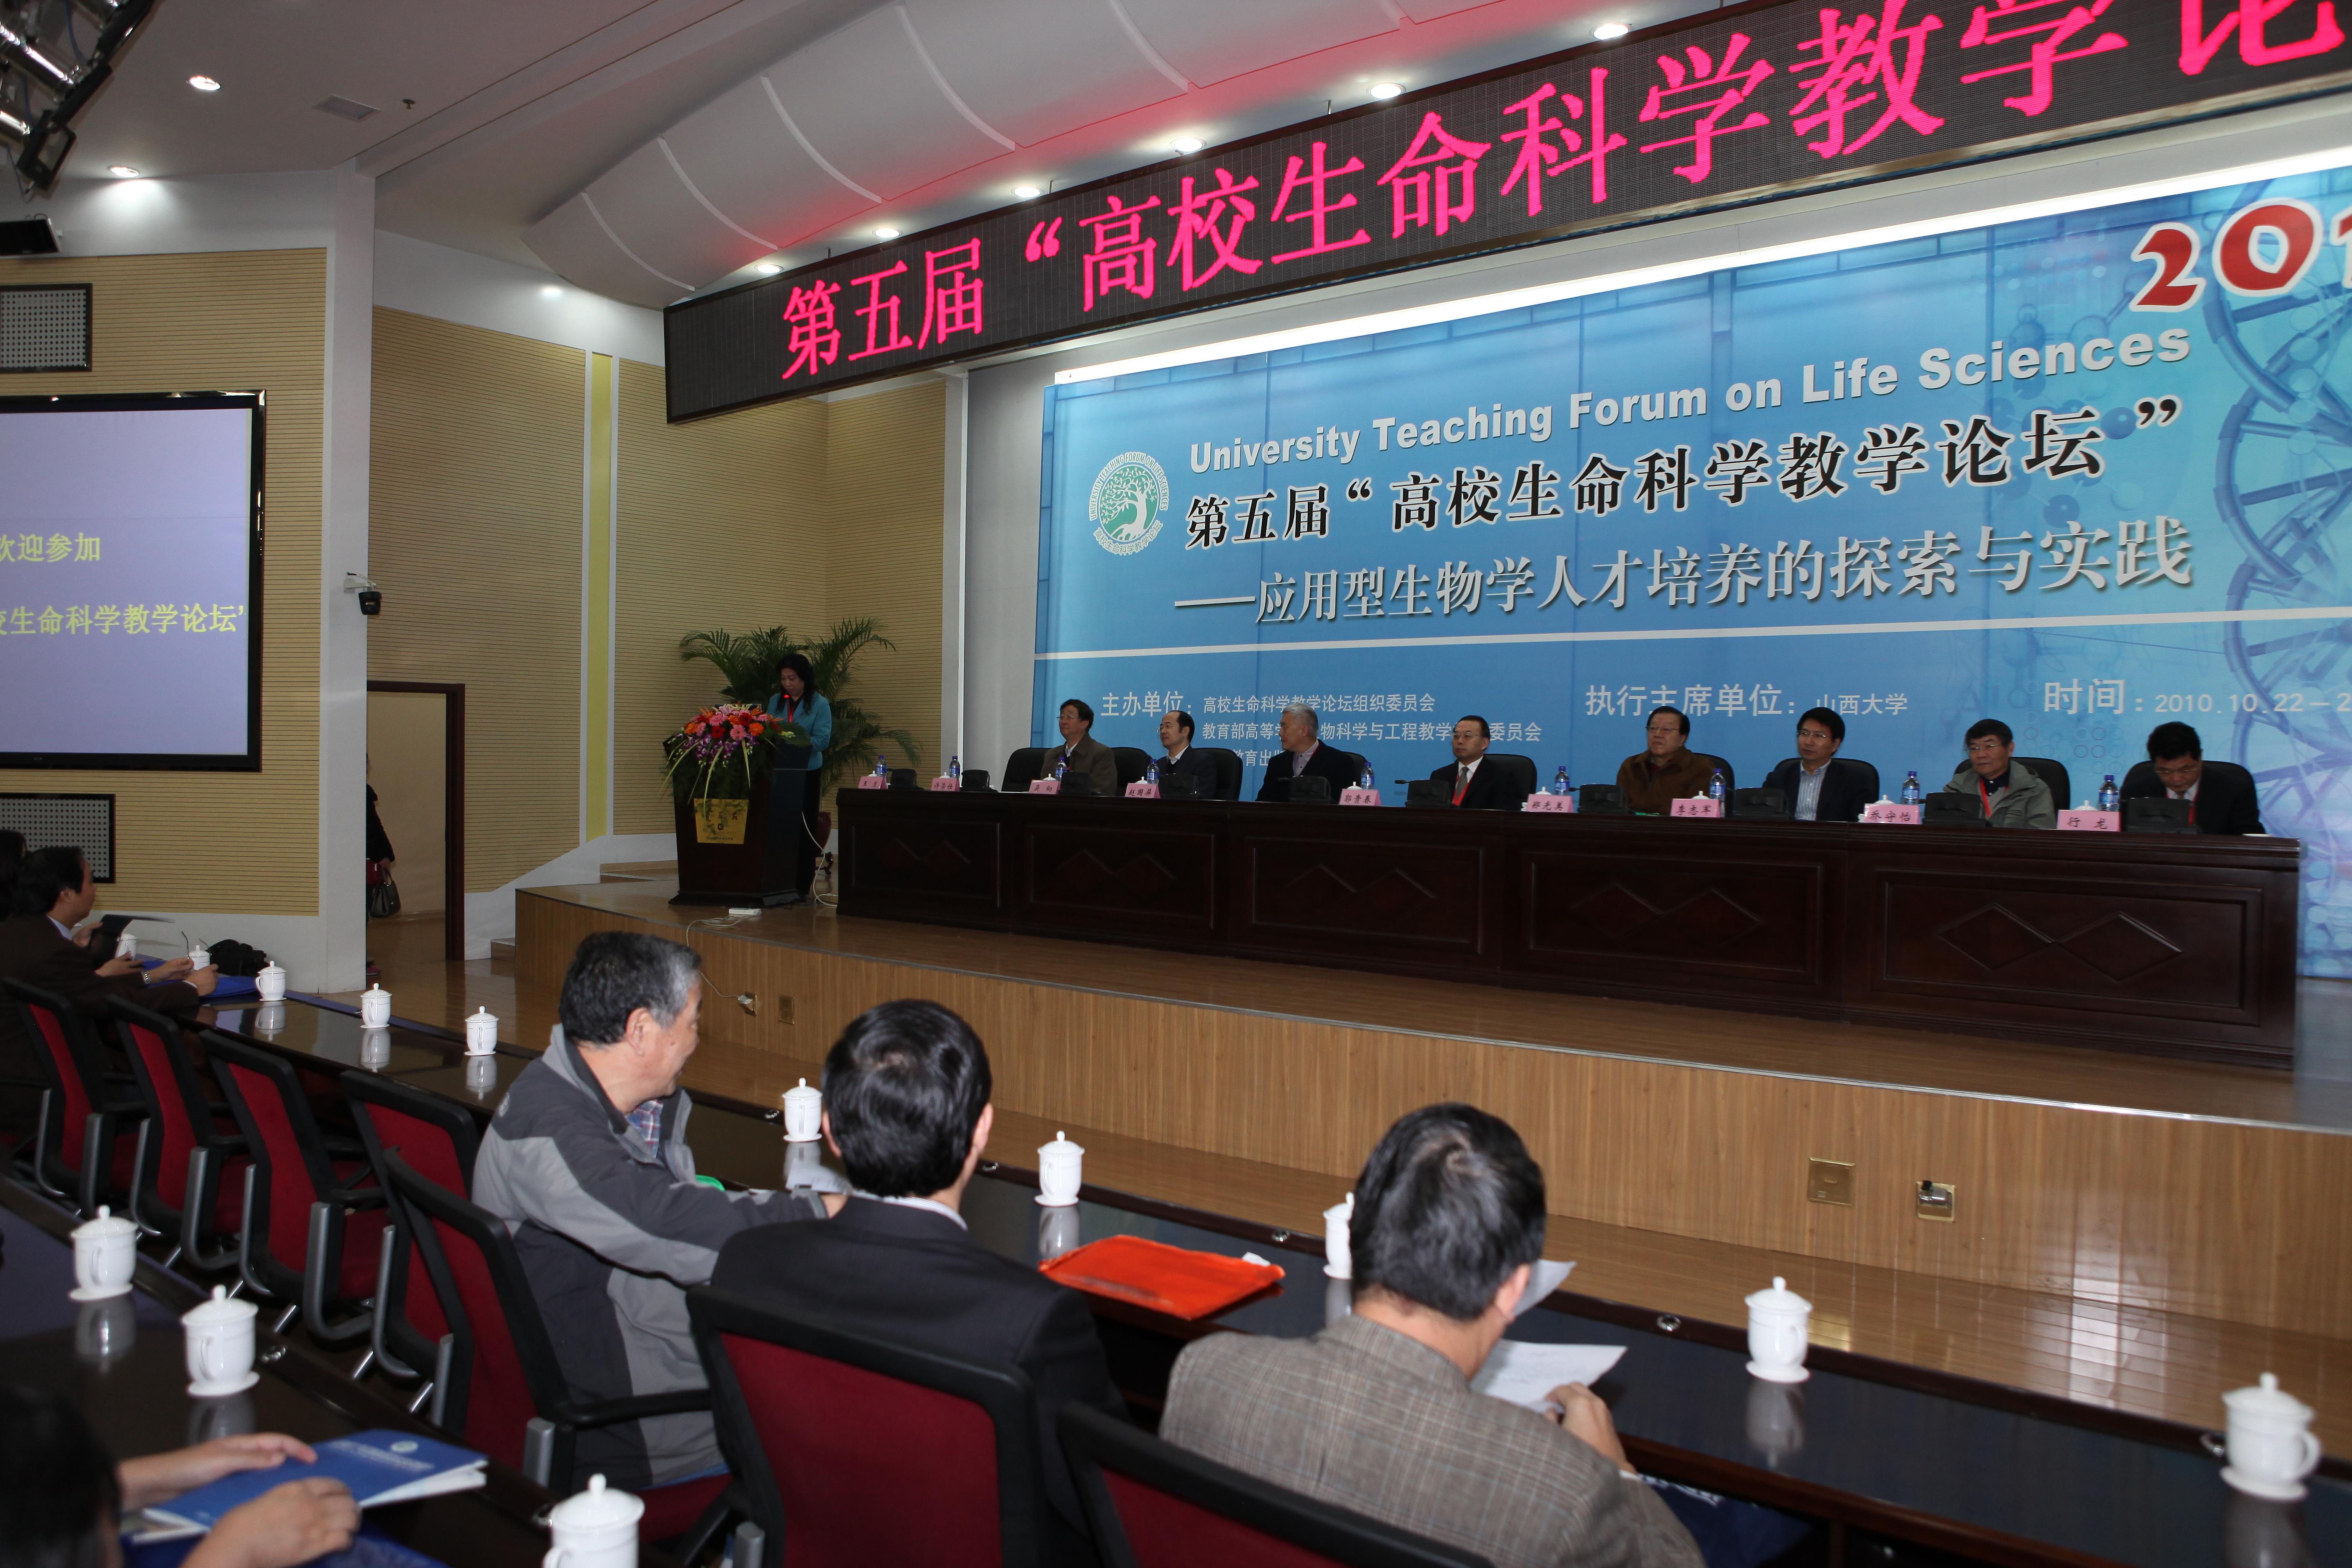 FIFTH NATIONAL FORUM ON THE TEACHING OF LIFE SCIENCE HELD IN SHANXI UNIVERSITY